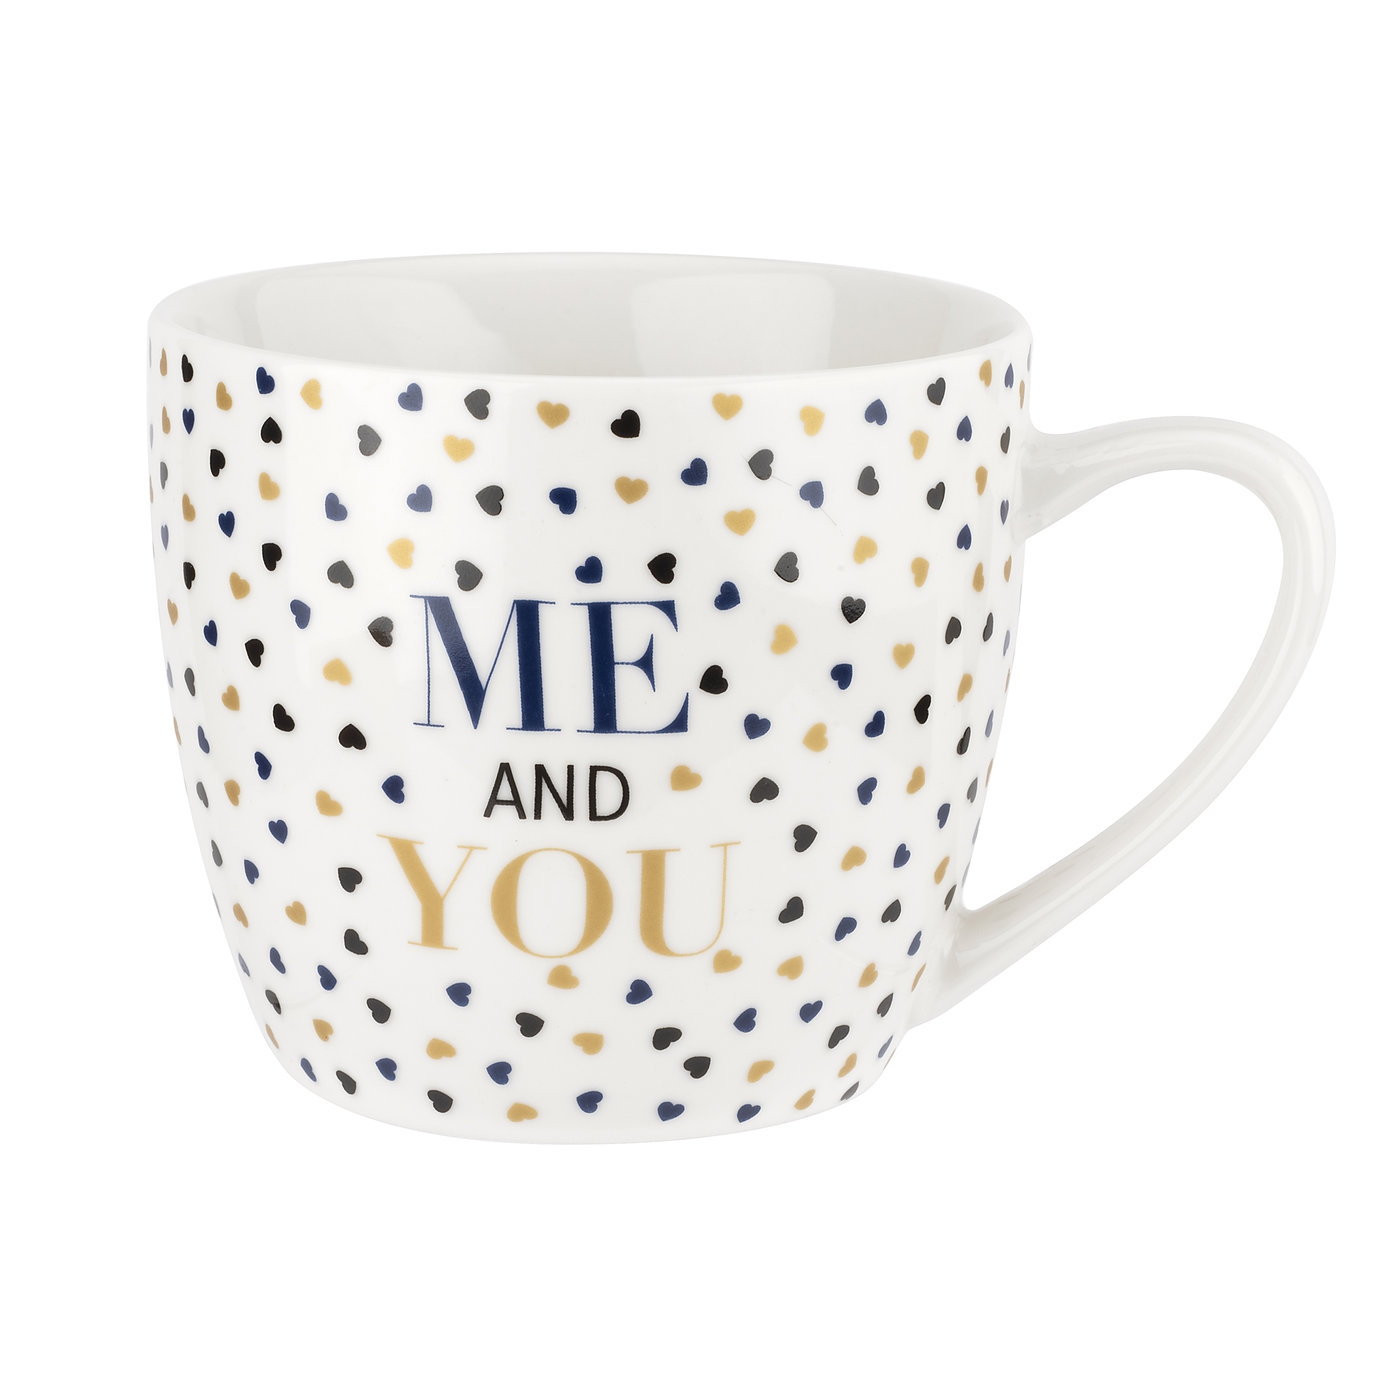 You & Me 16 Ounce Mug image number null